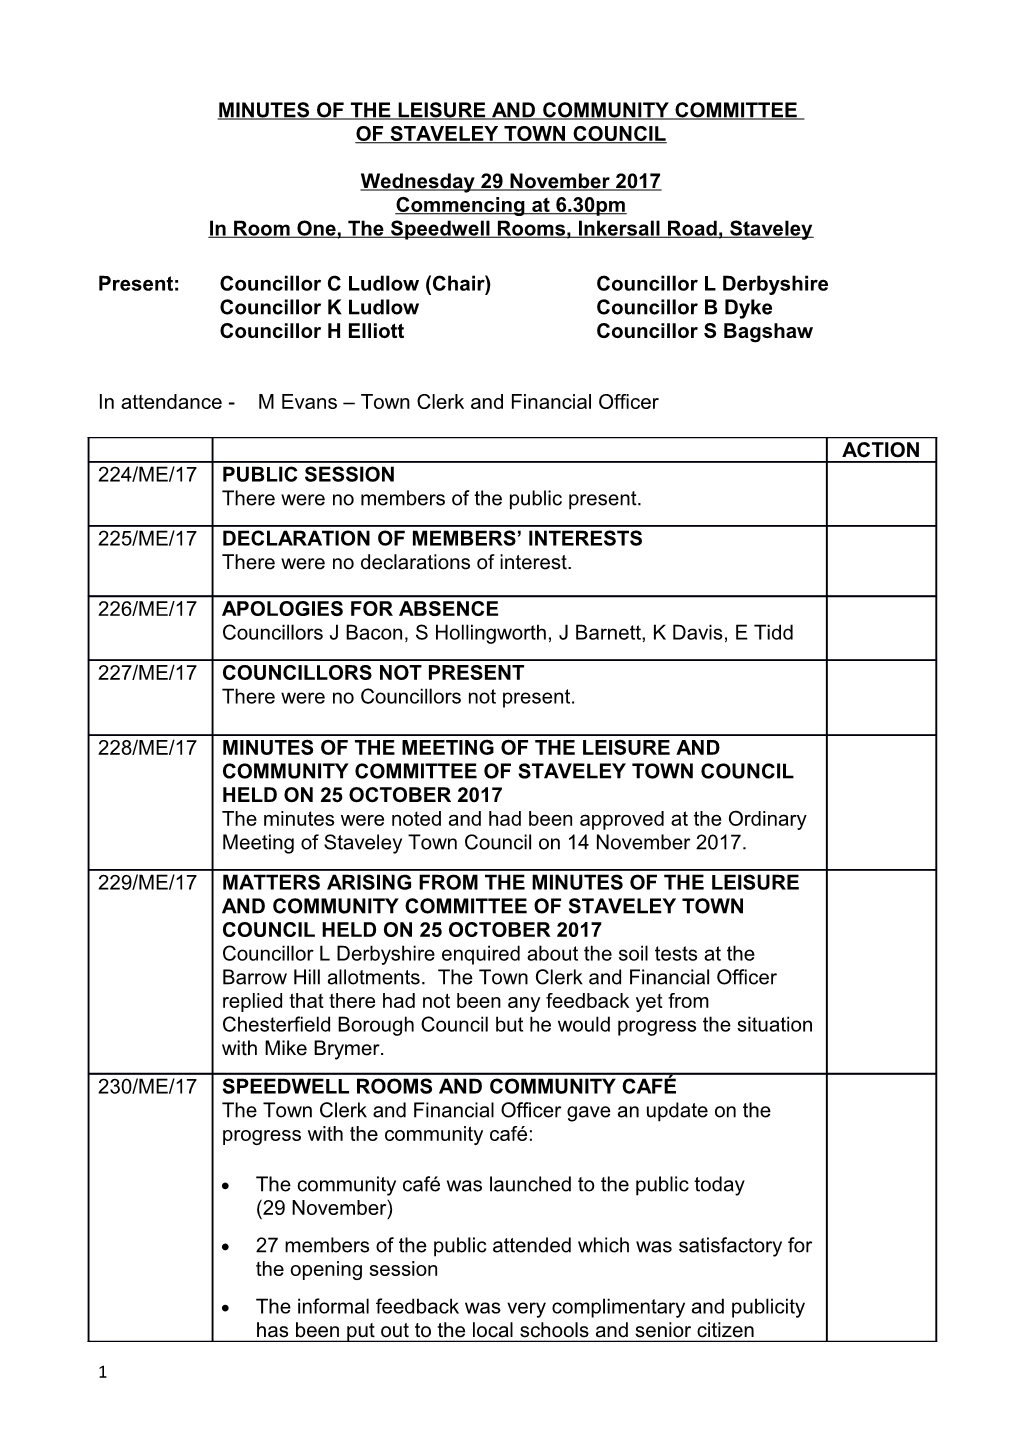 Minutes of the Leisure and Community Committee